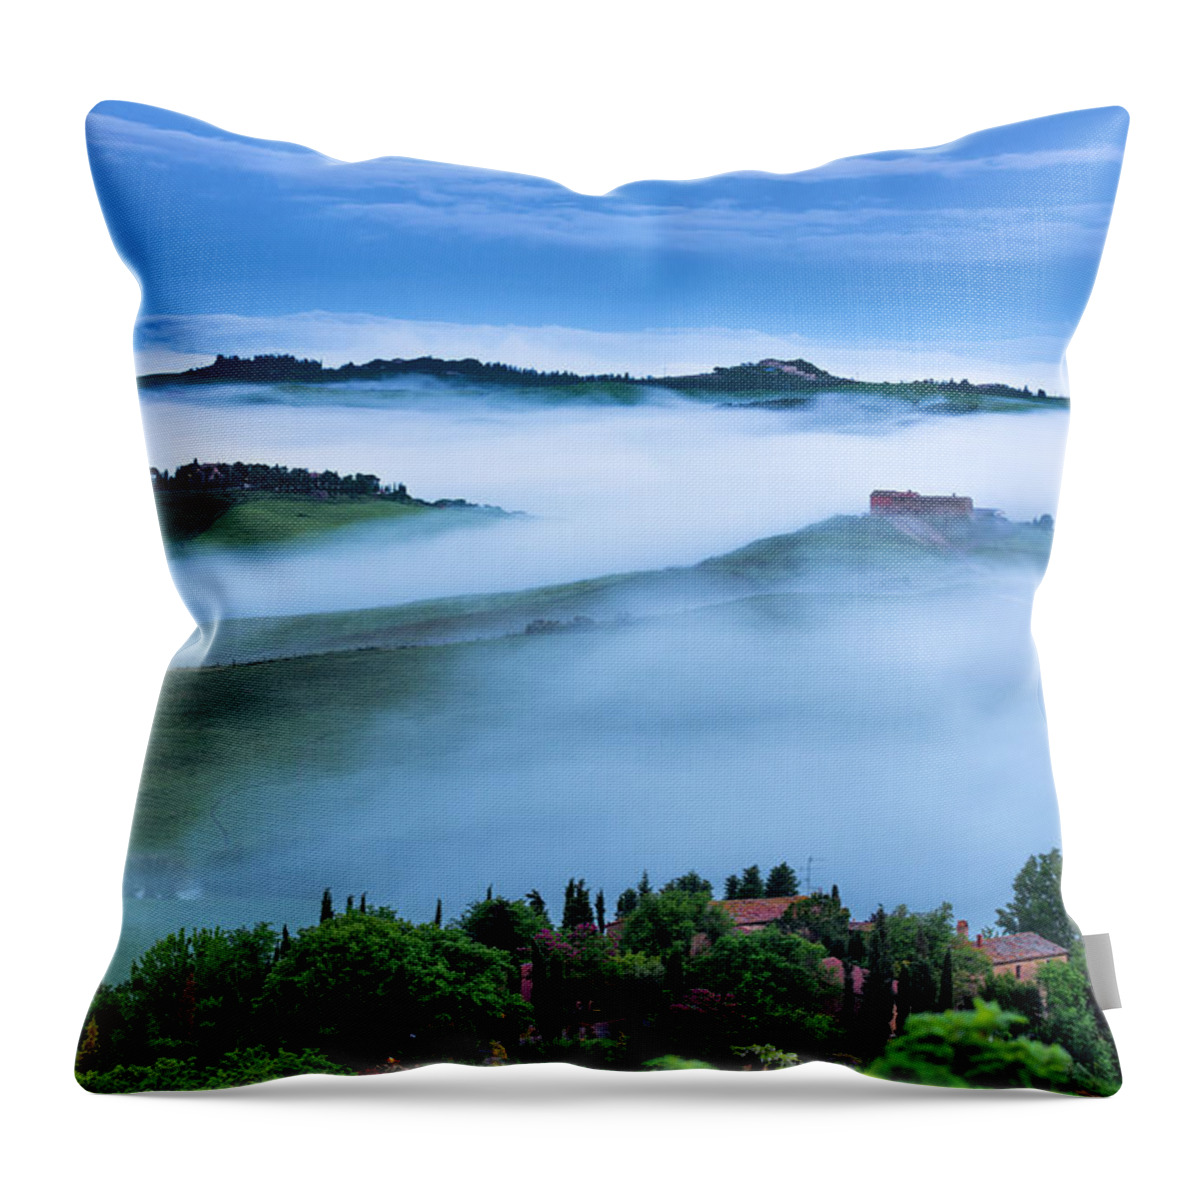 Scenics Throw Pillow featuring the photograph Farm In Tuscany At Dawn by Gehringj